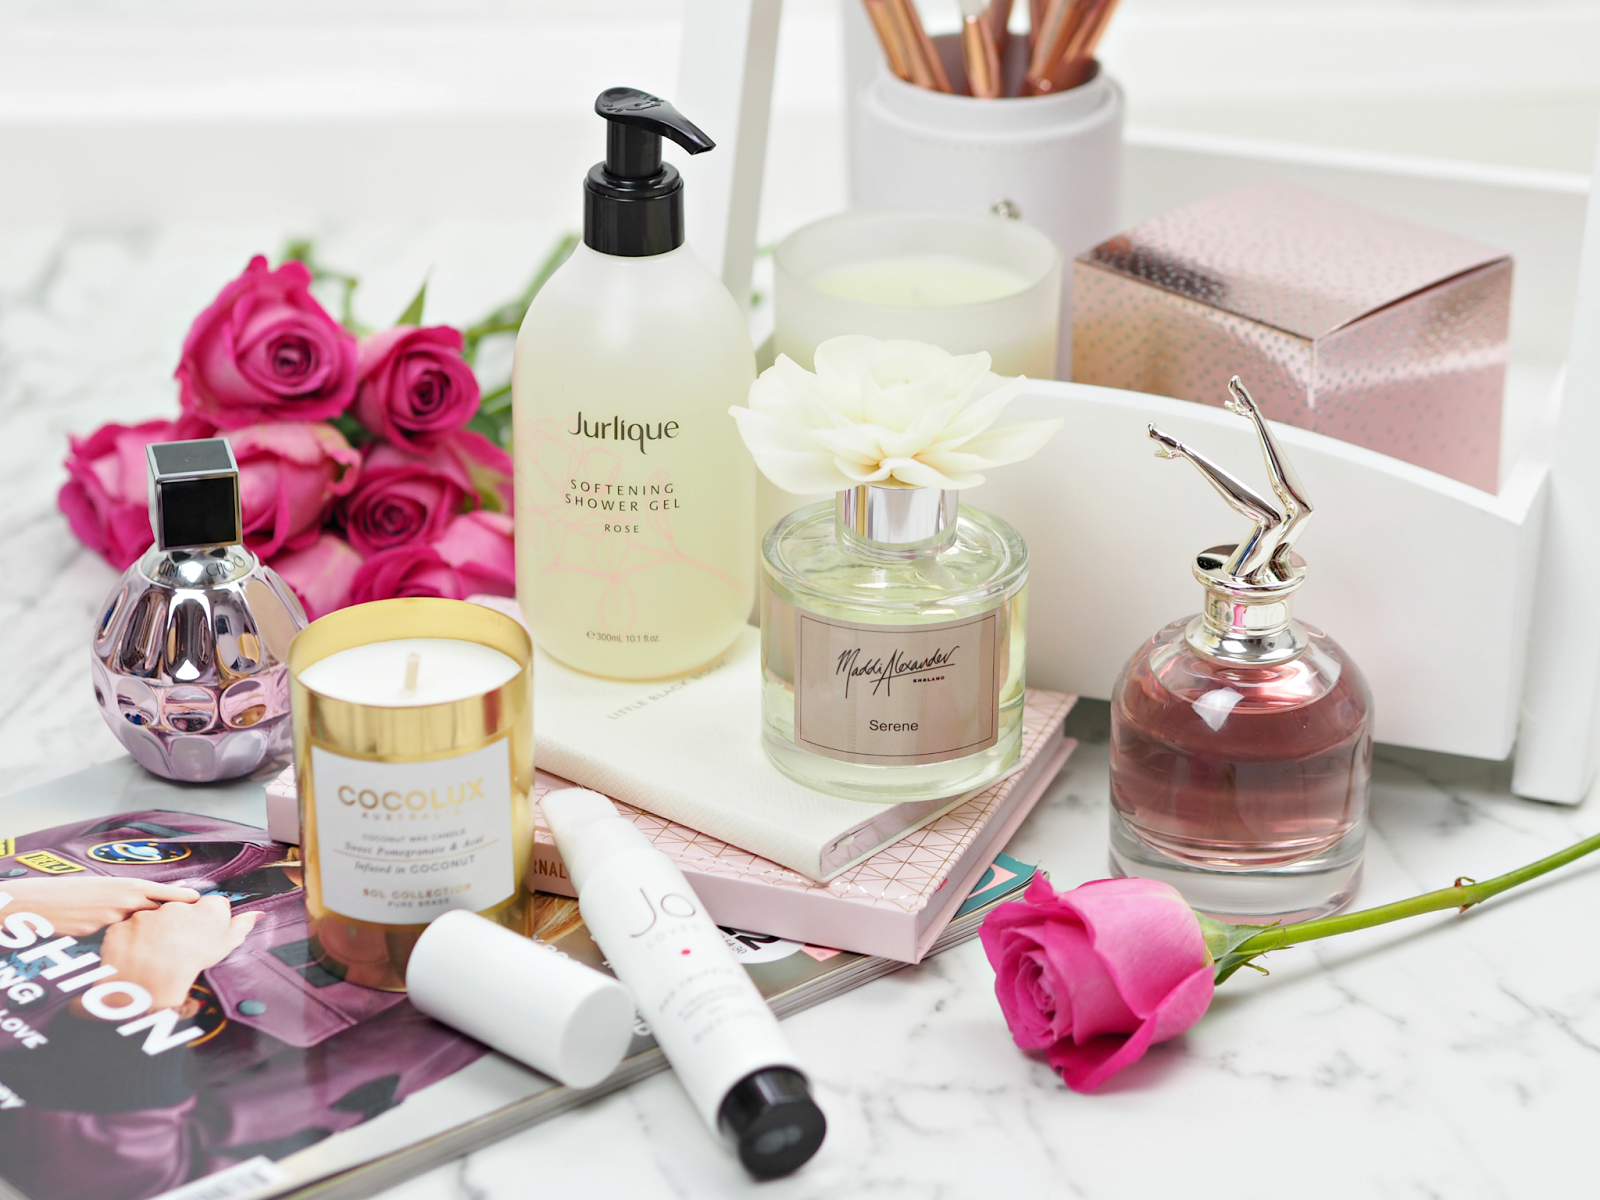 Seven Luxury Body & Home Fragrance Treats You'll Dream Of Surrounding Yourself With